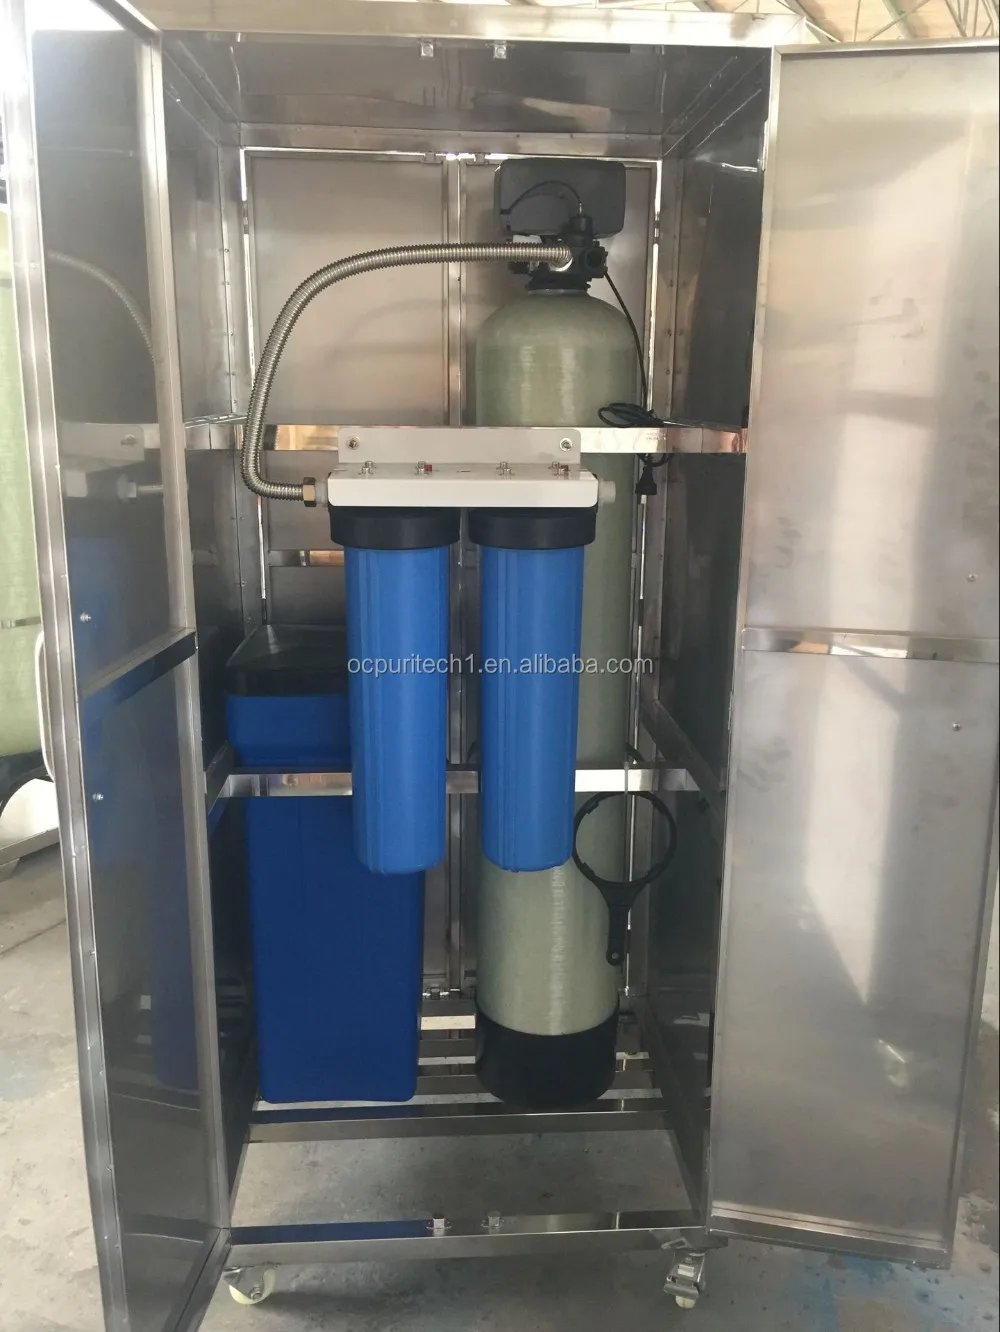 Hight quality manual and automatic FRP water softener valve